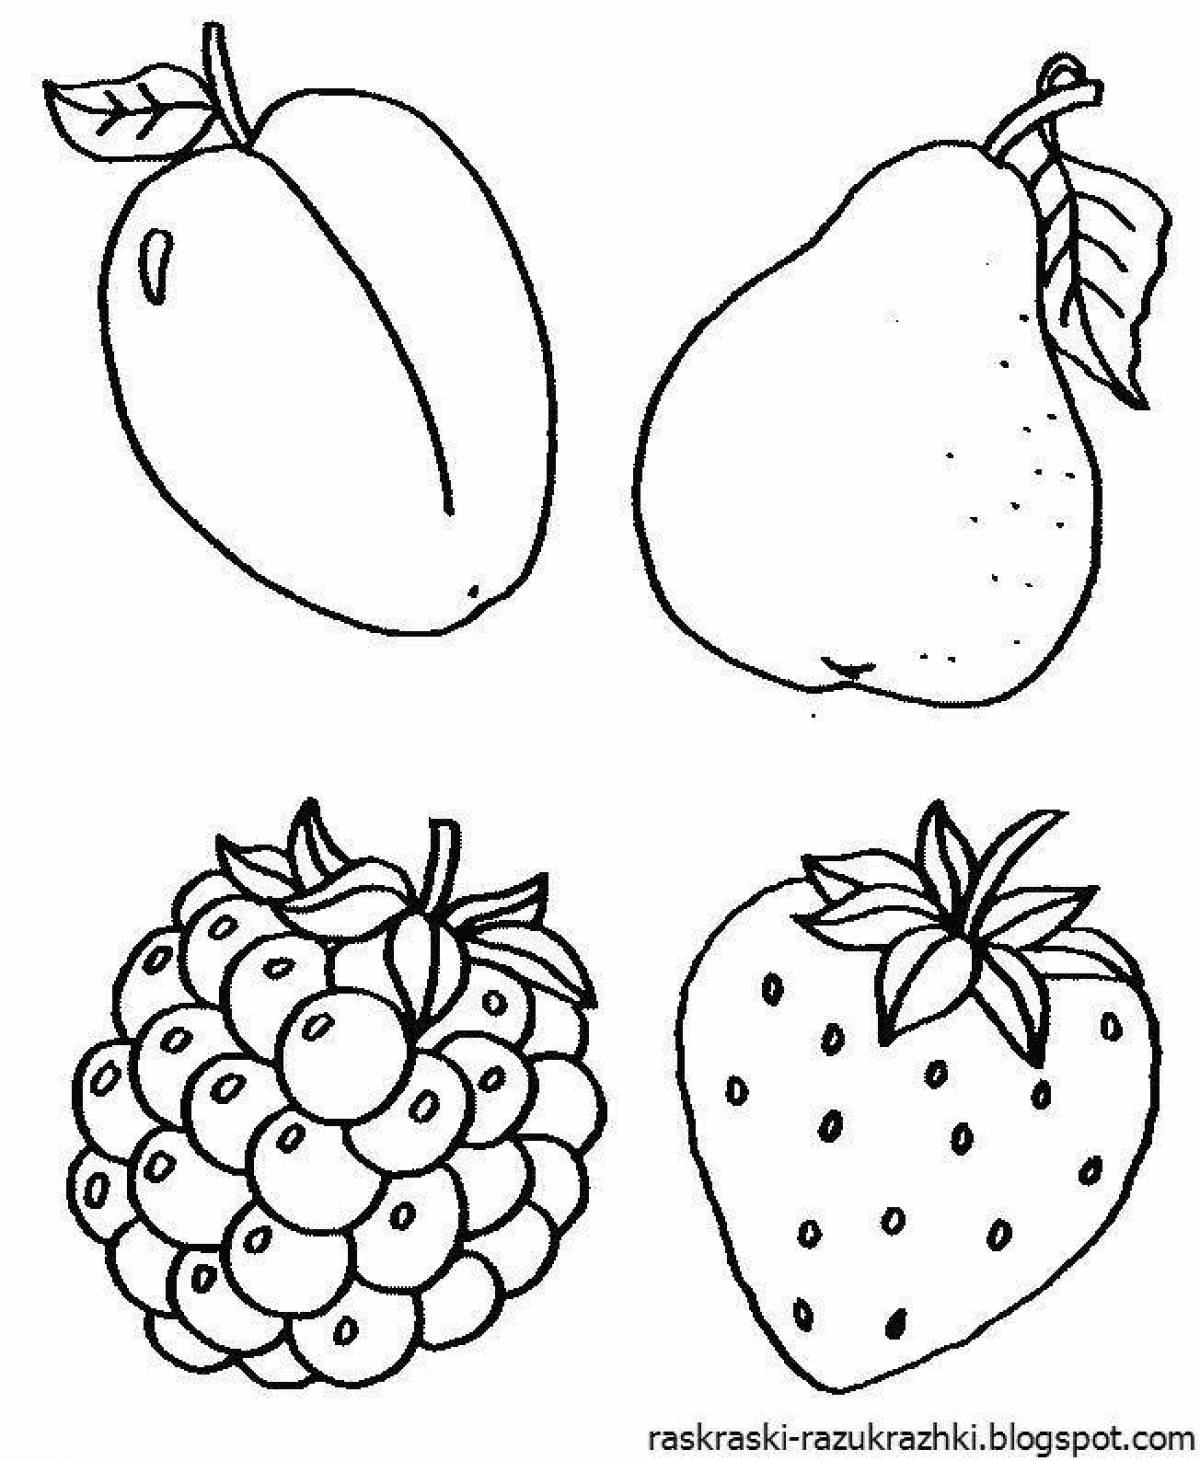 Colorful fruit coloring page for 4-5 year olds